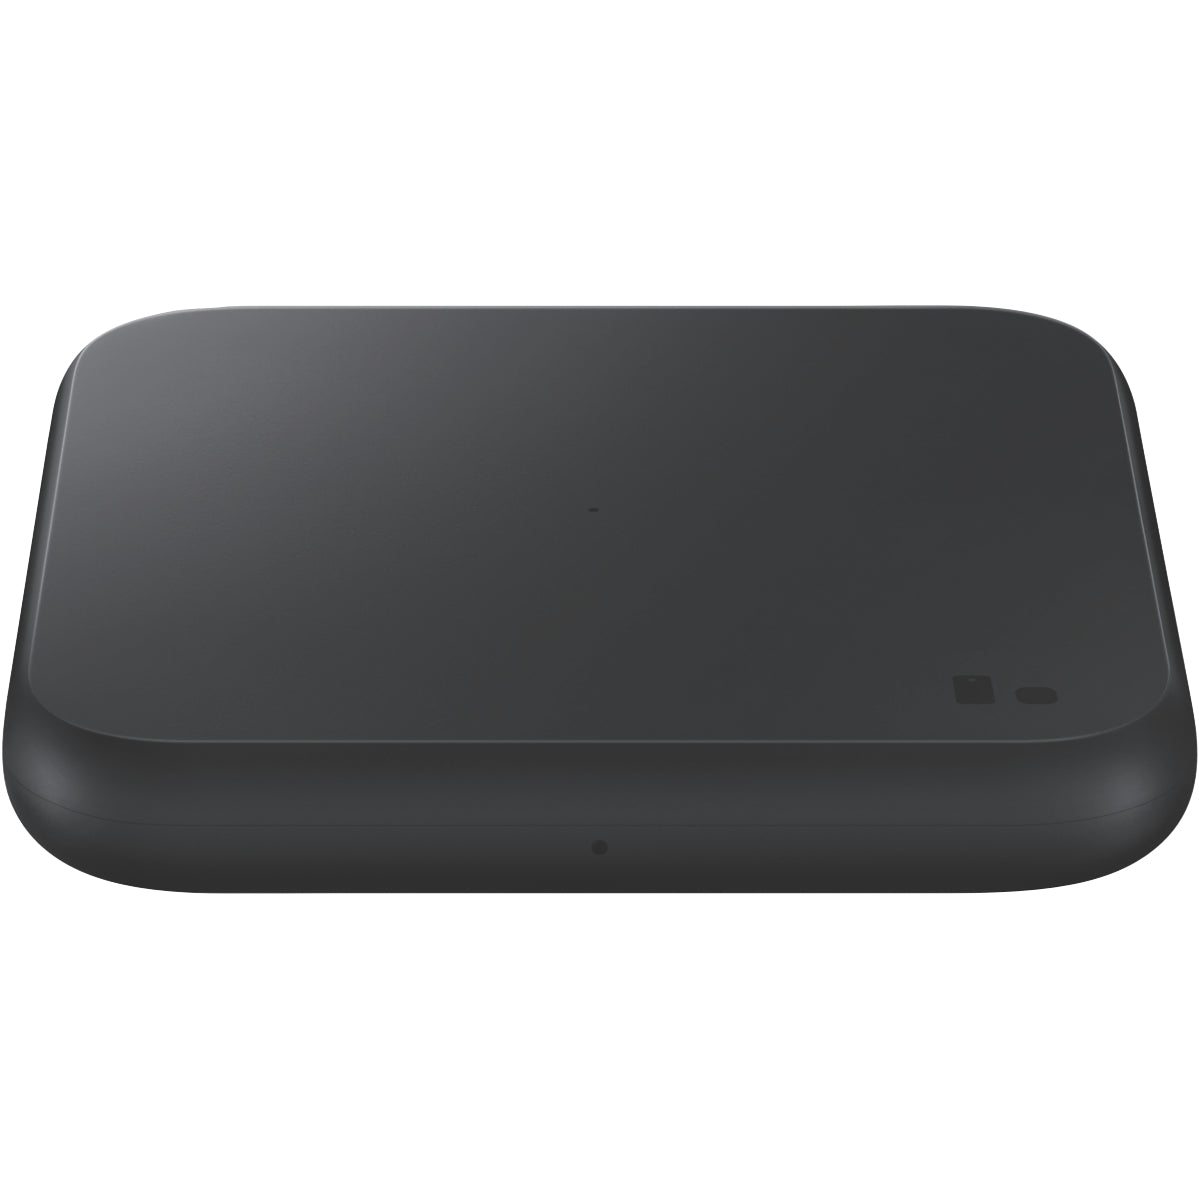 Samsung Wireless Charger and Charger Pad - Black